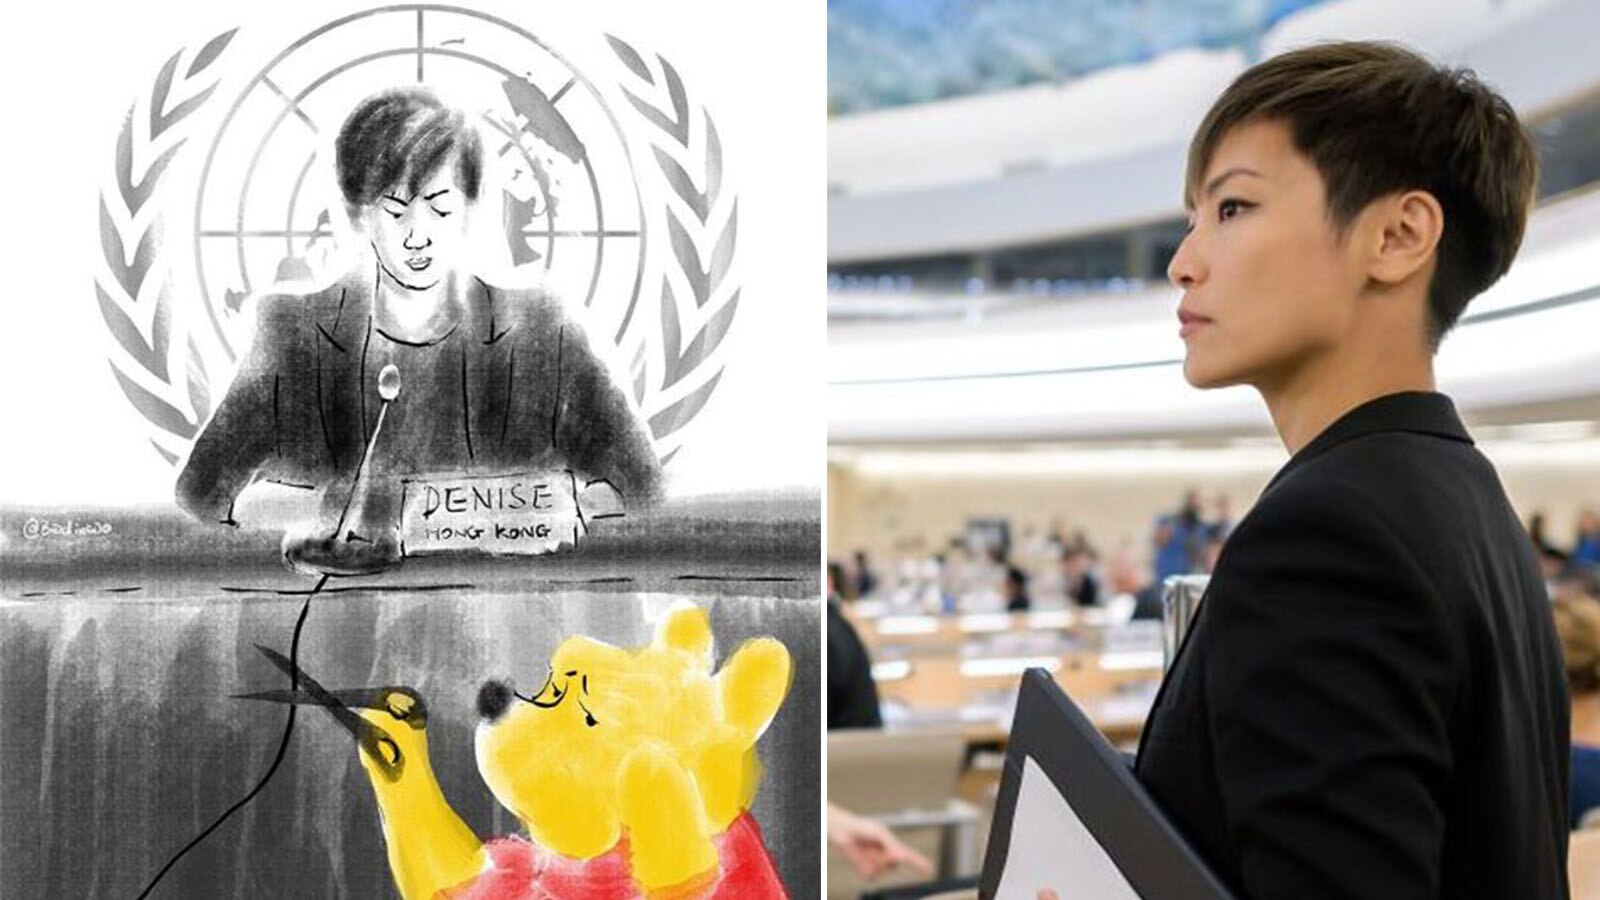 Cantonese pop singer Denise Ho was interrupted twice by the Chinese delegation when she addressed the United Nations Human Rights Council in Geneva.